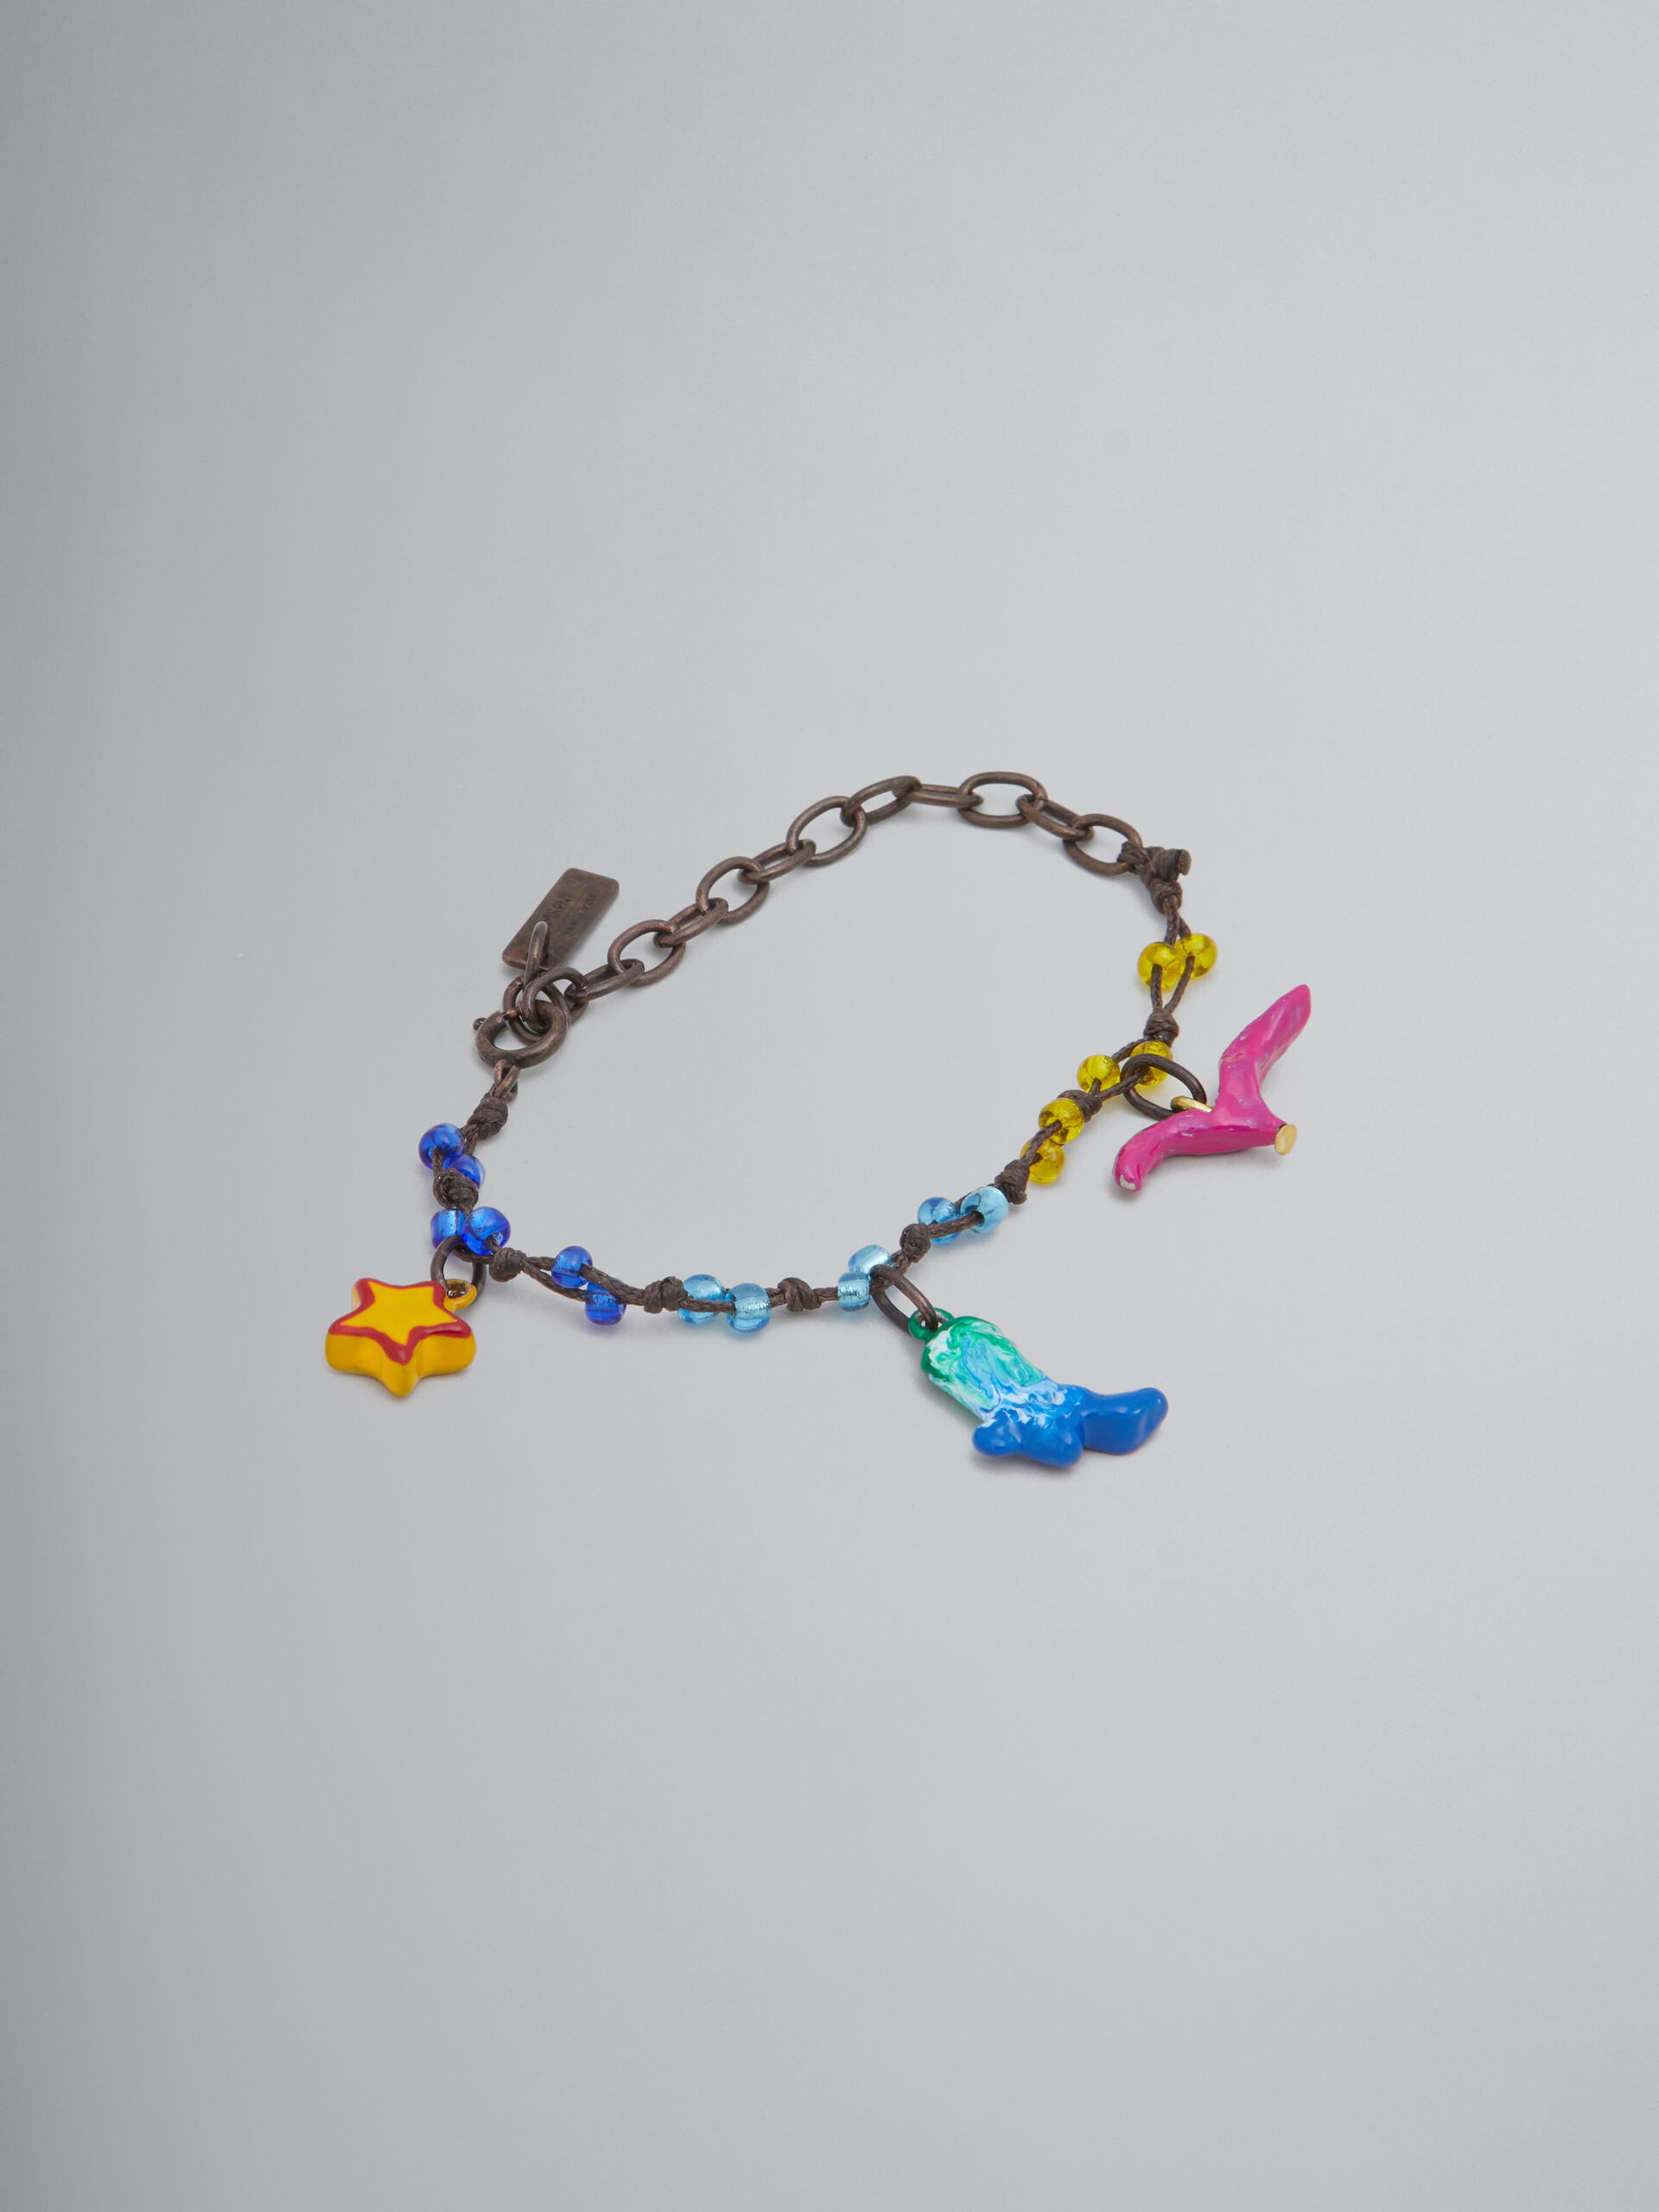 Marni x No Vacancy Inn - Bracelet with red blue and yellow pendants - Bracelets - Image 1